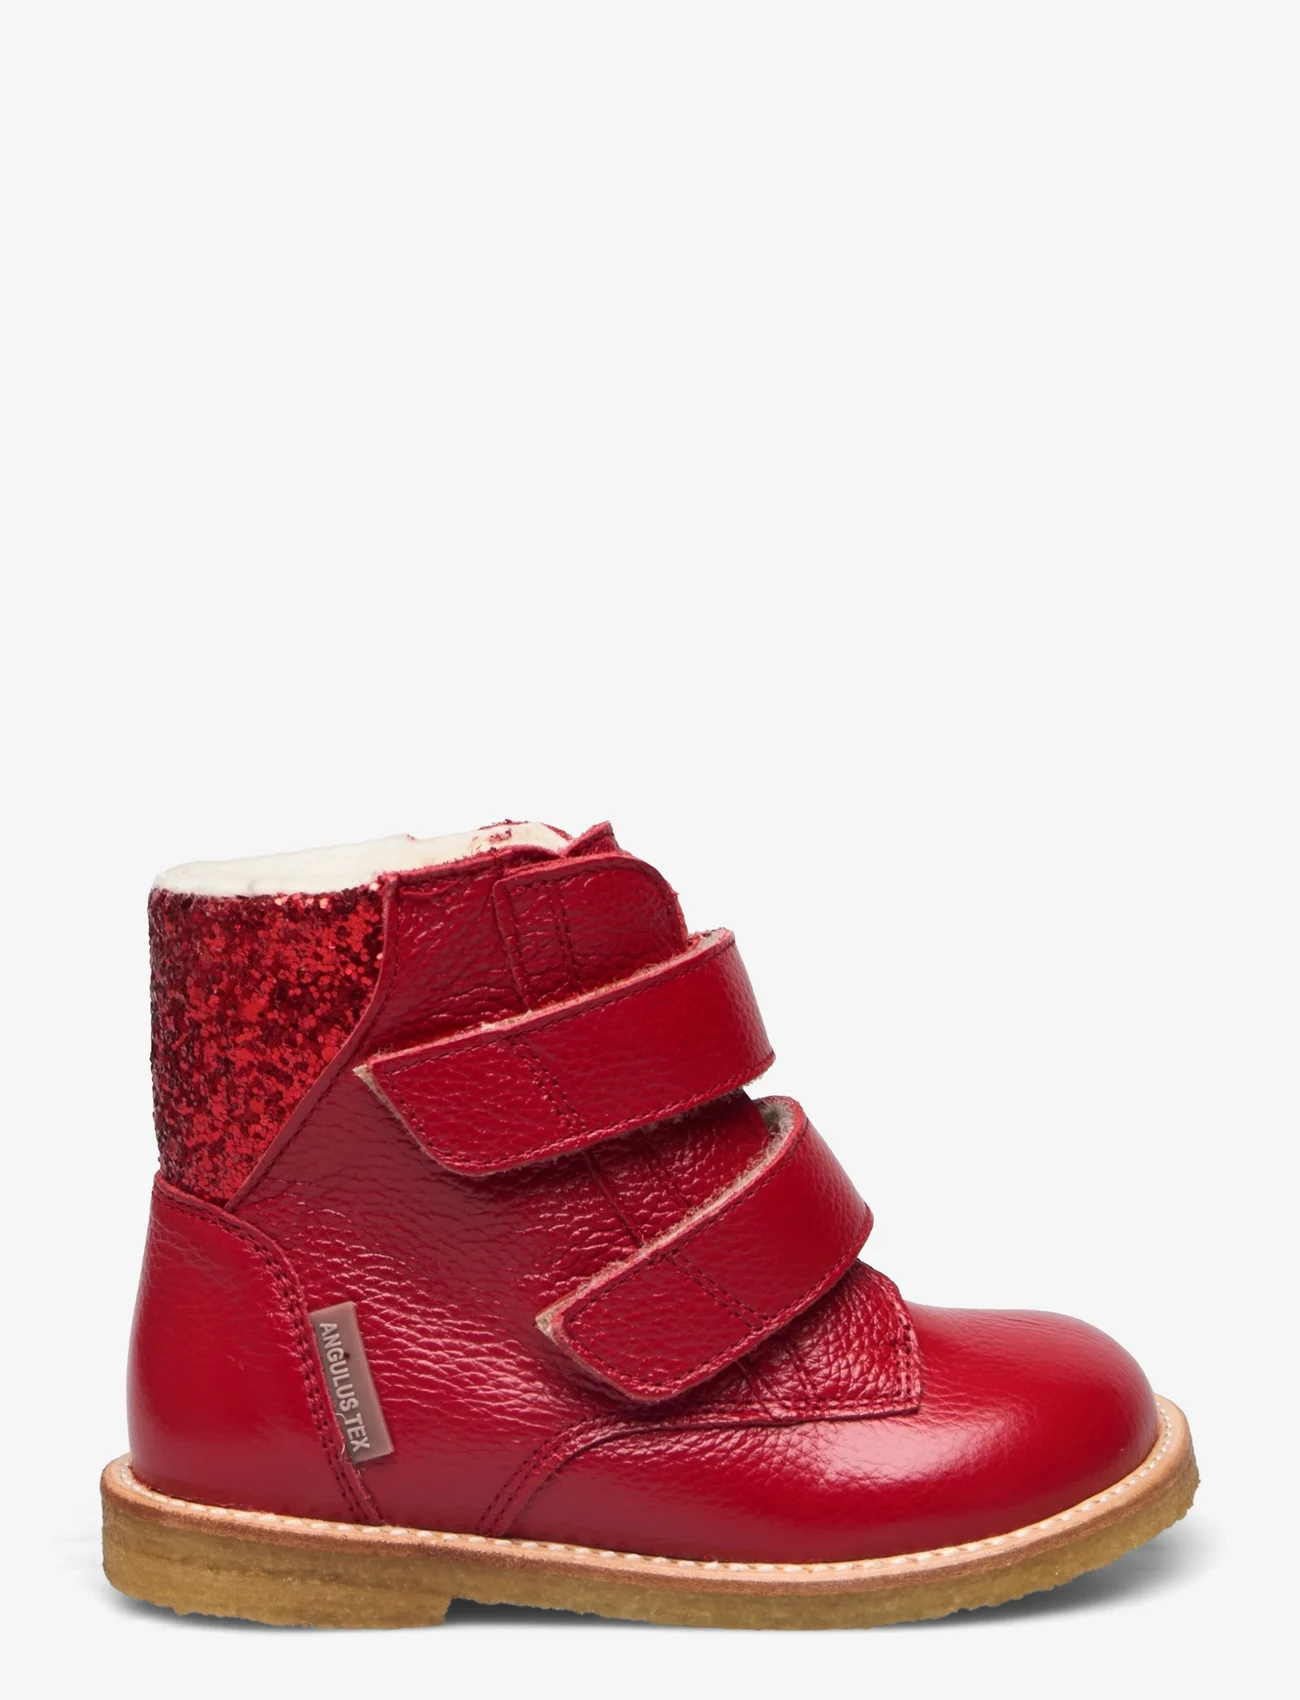 ANGULUS - Boots - flat - with velcro - bērniem - 2568/1711 red/red glitter - 1